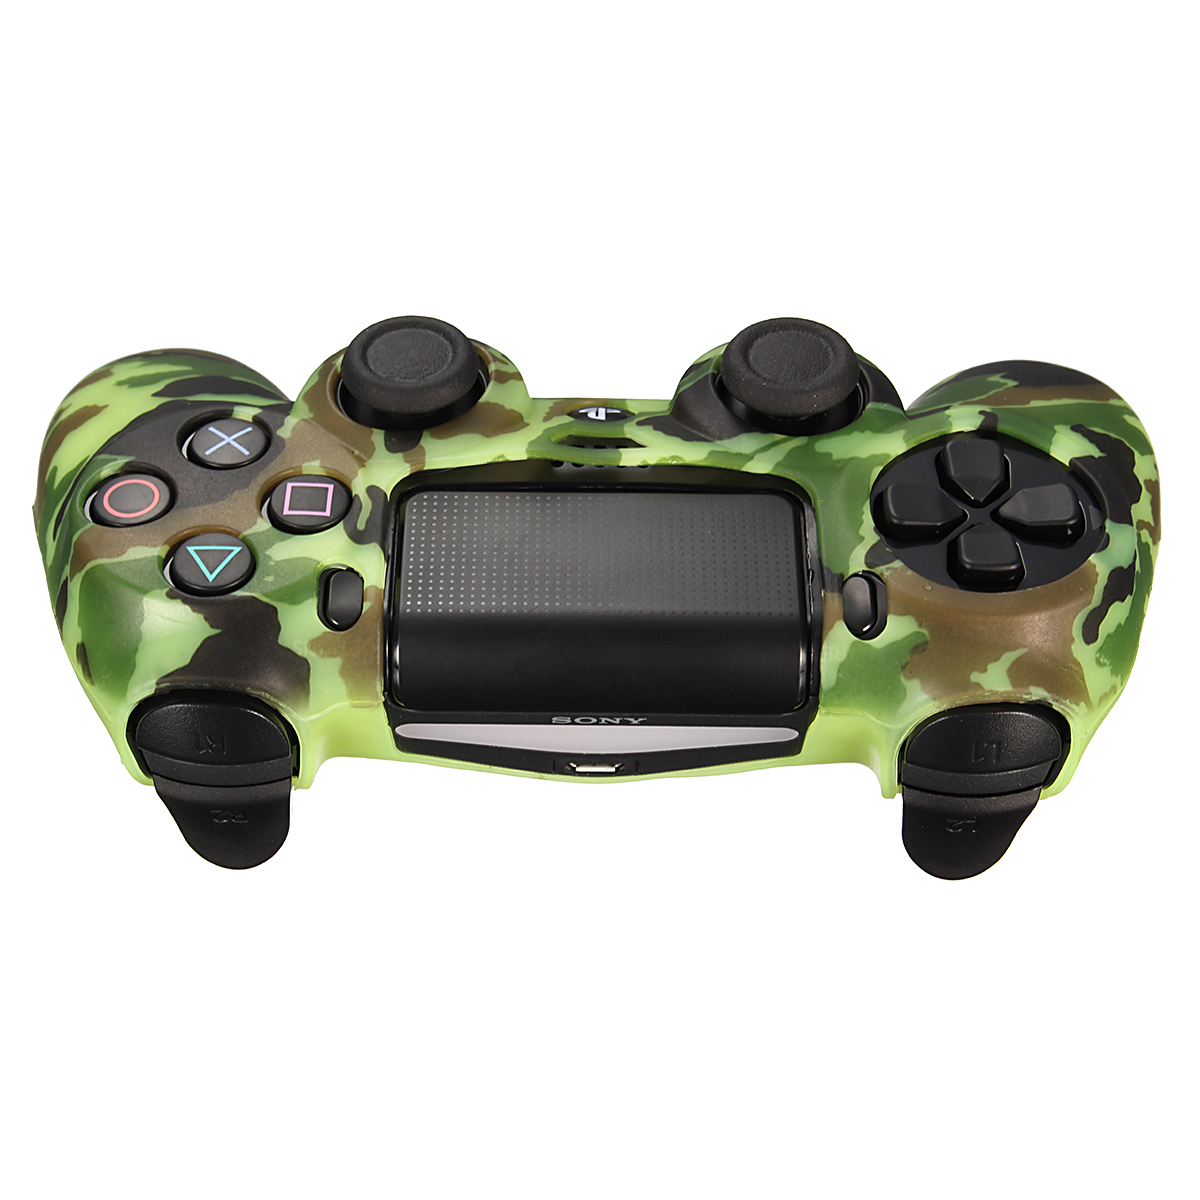 Durable Decal Camouflage Grip Cover Case Silicone Rubber Soft Skin Protector for Playstation 4 for Dualshock 4 Gamepad 5